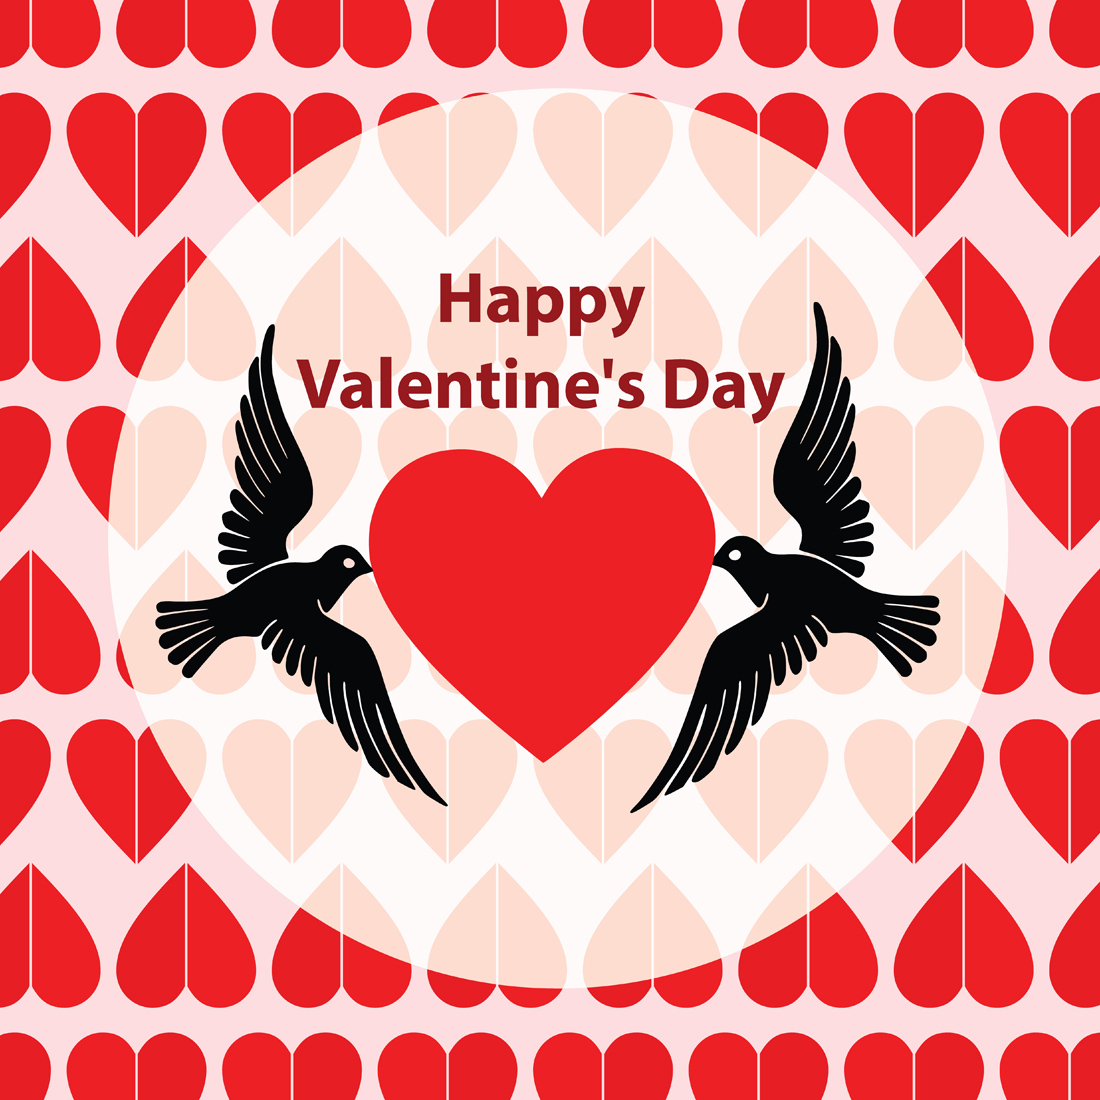 valentines day wishes card 1 36